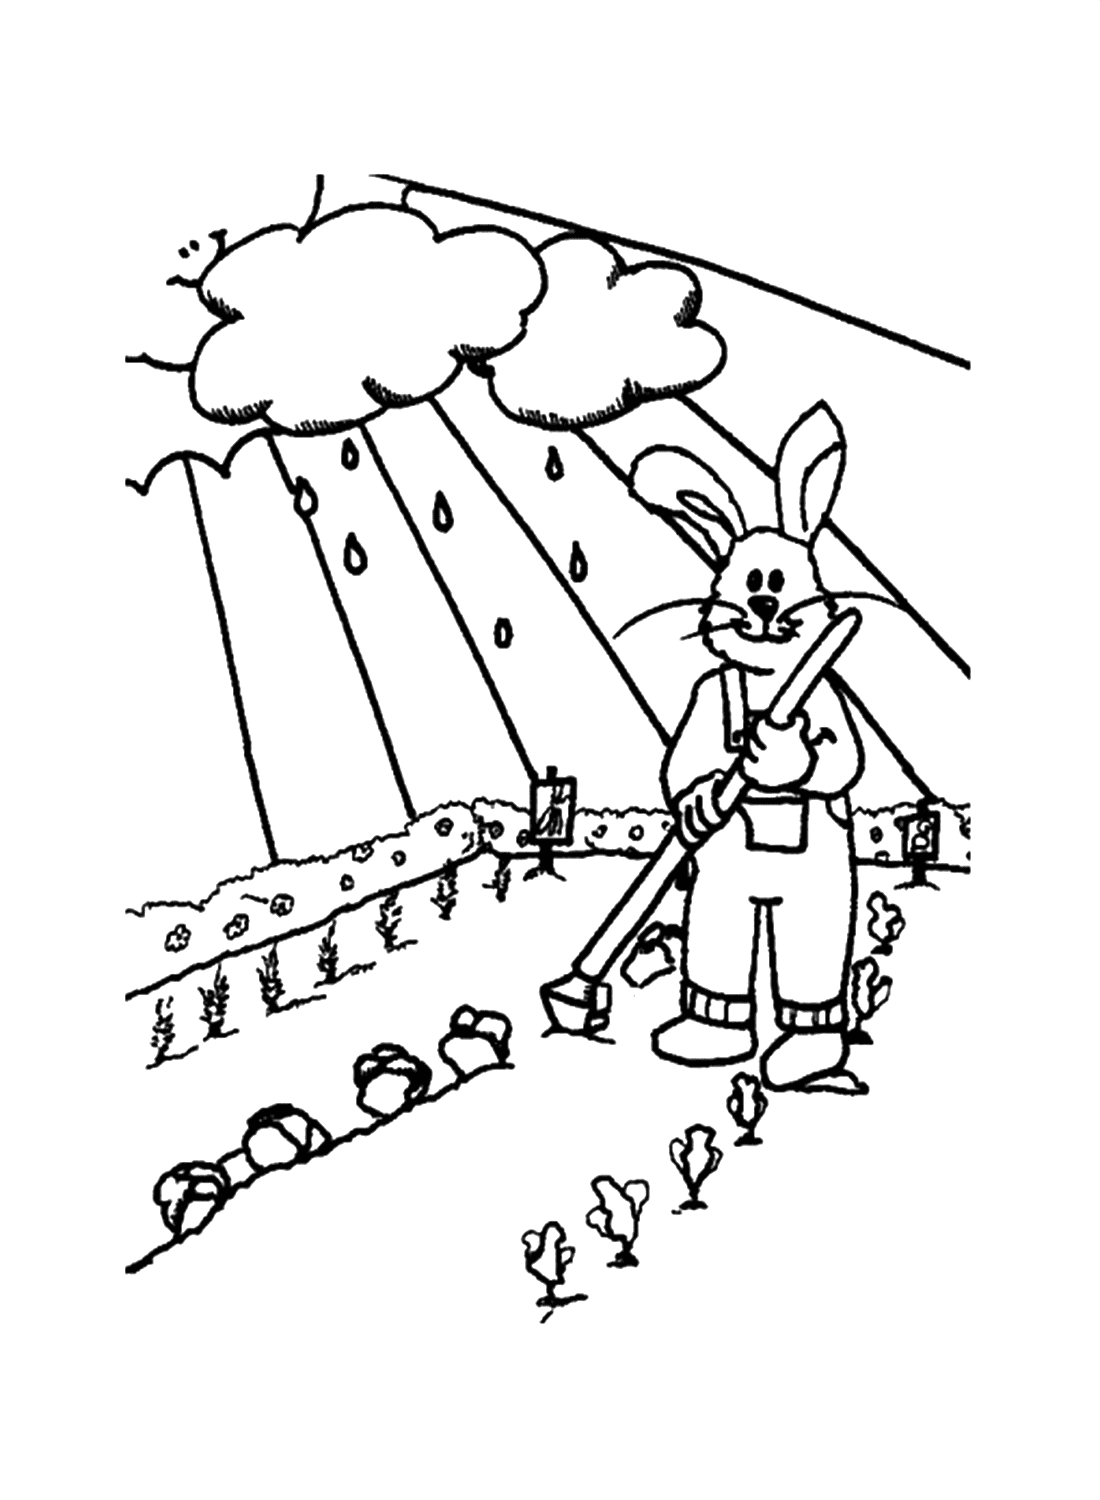 Rabbit Planting Vegetables On The Fields Coloring Pages